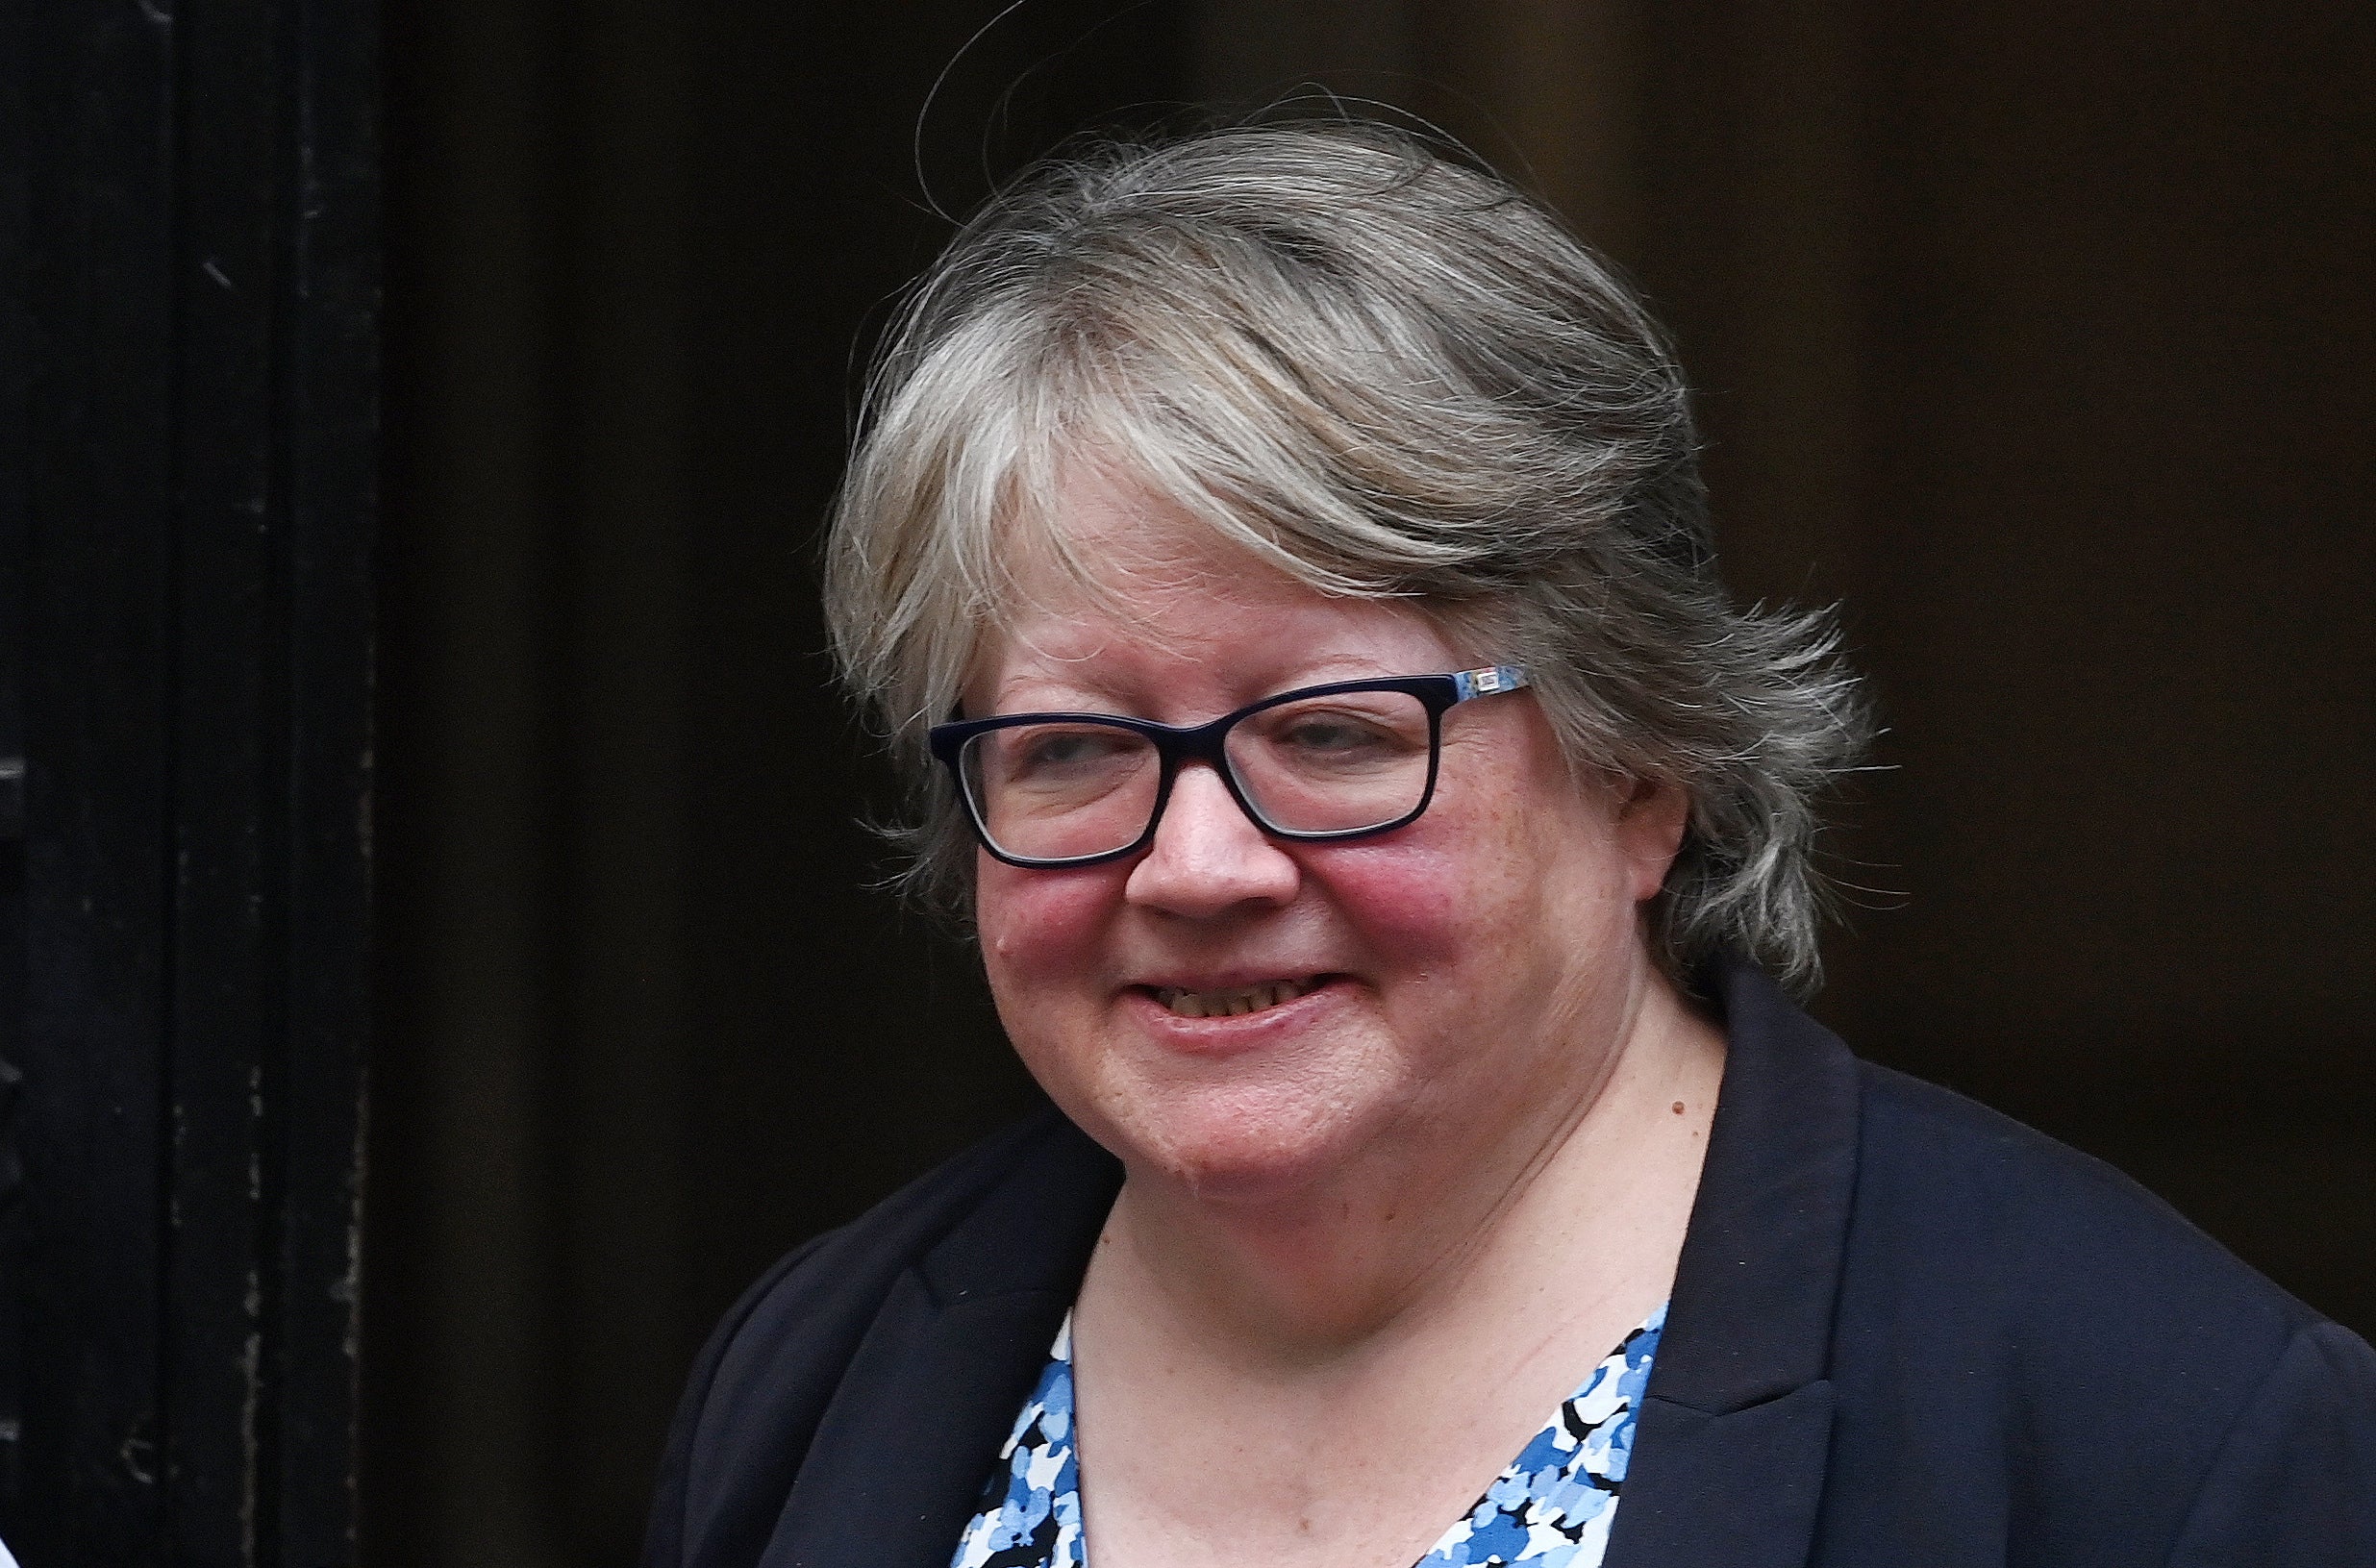 There is now just one cabinet minister with a PhD: Therese Coffey